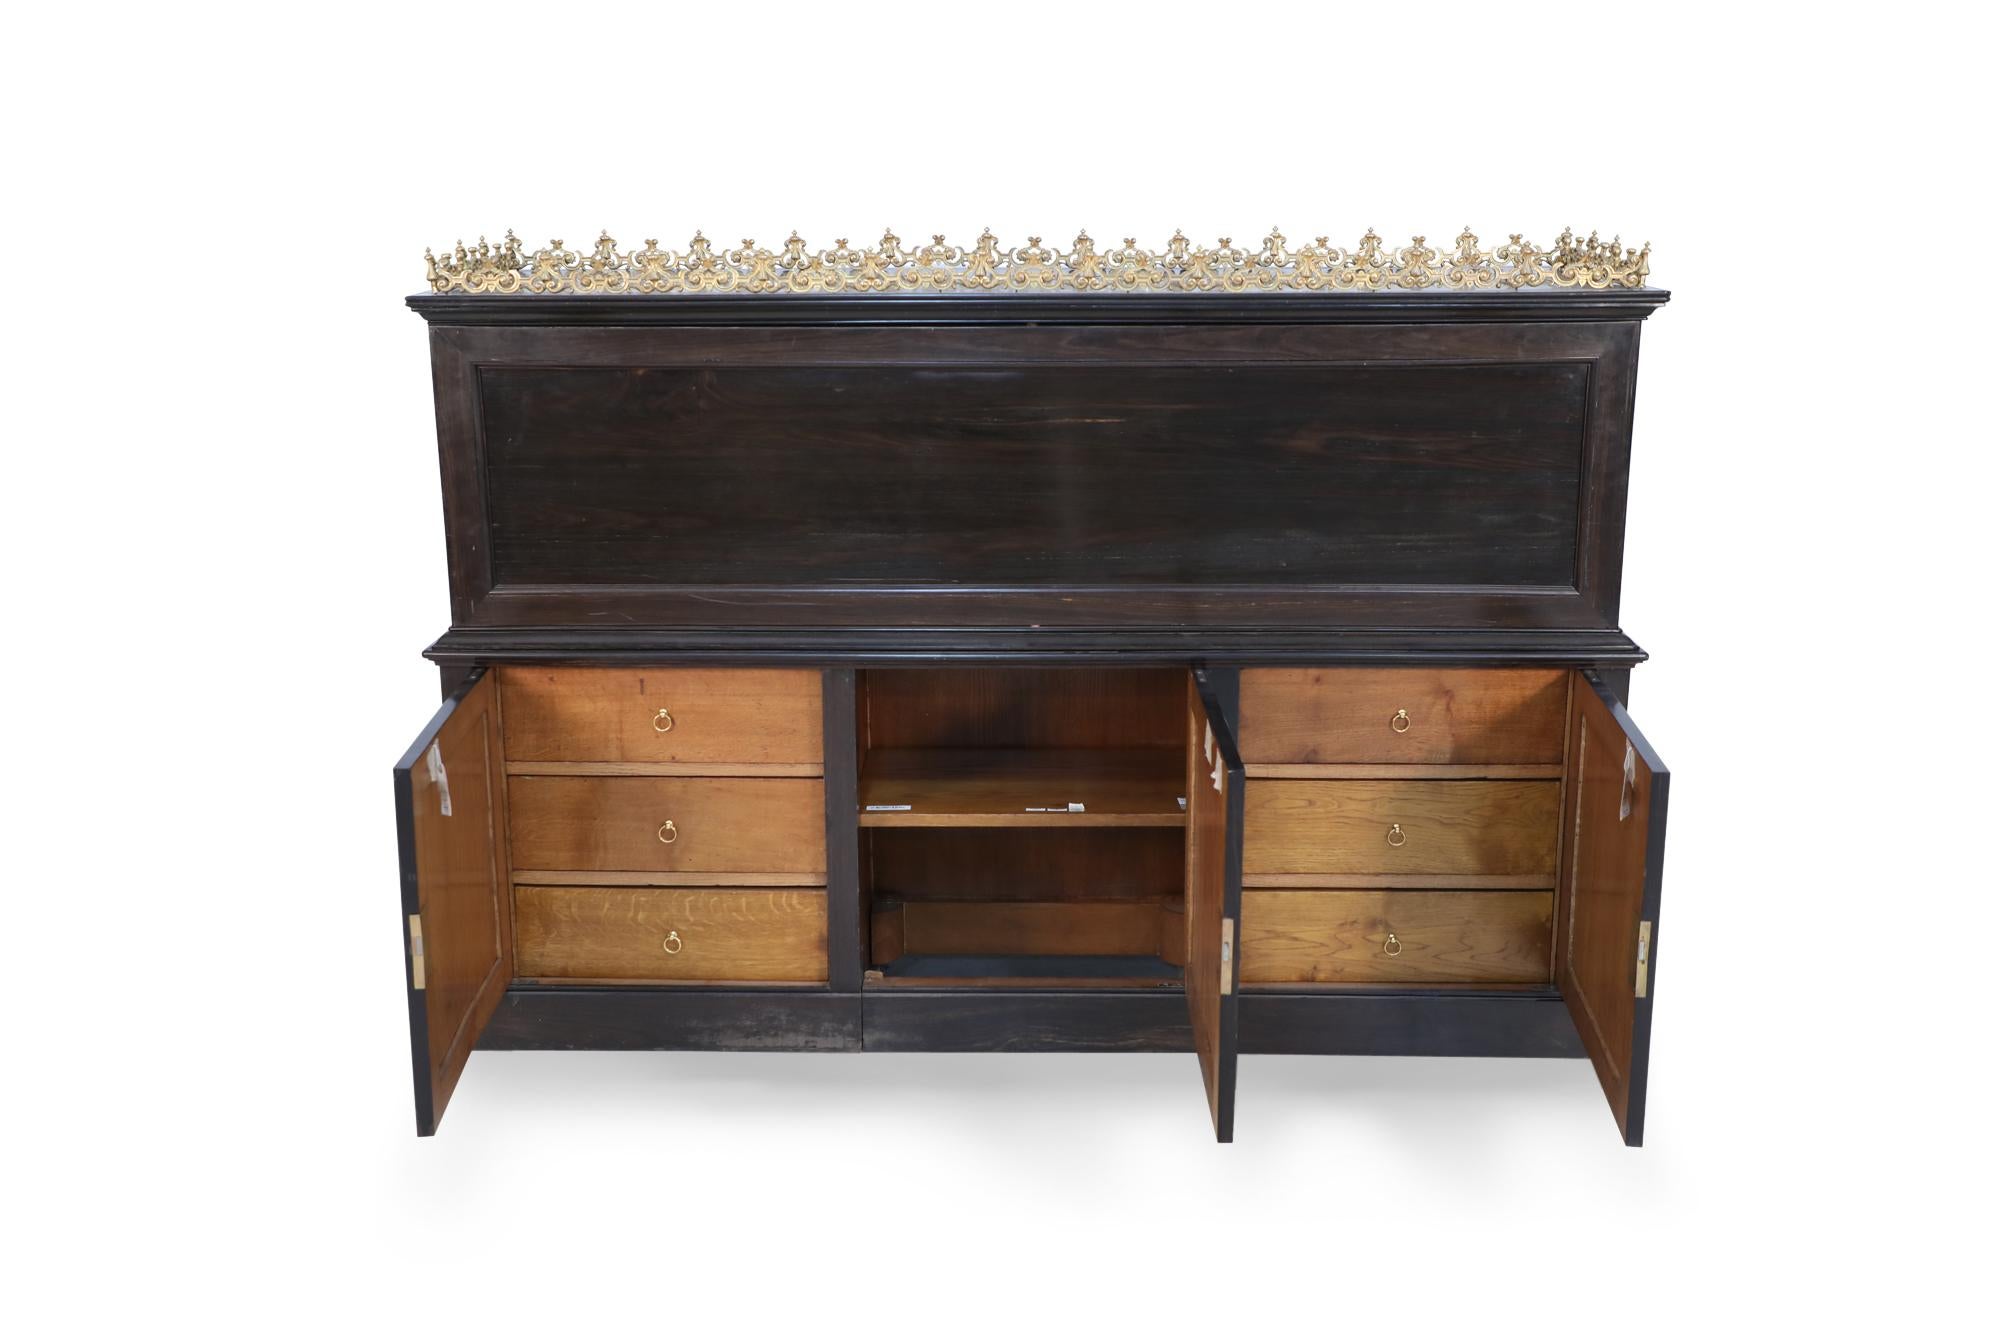 19th Century Empire Style English Roll Top Desk with Bronze Mounts For Sale 5